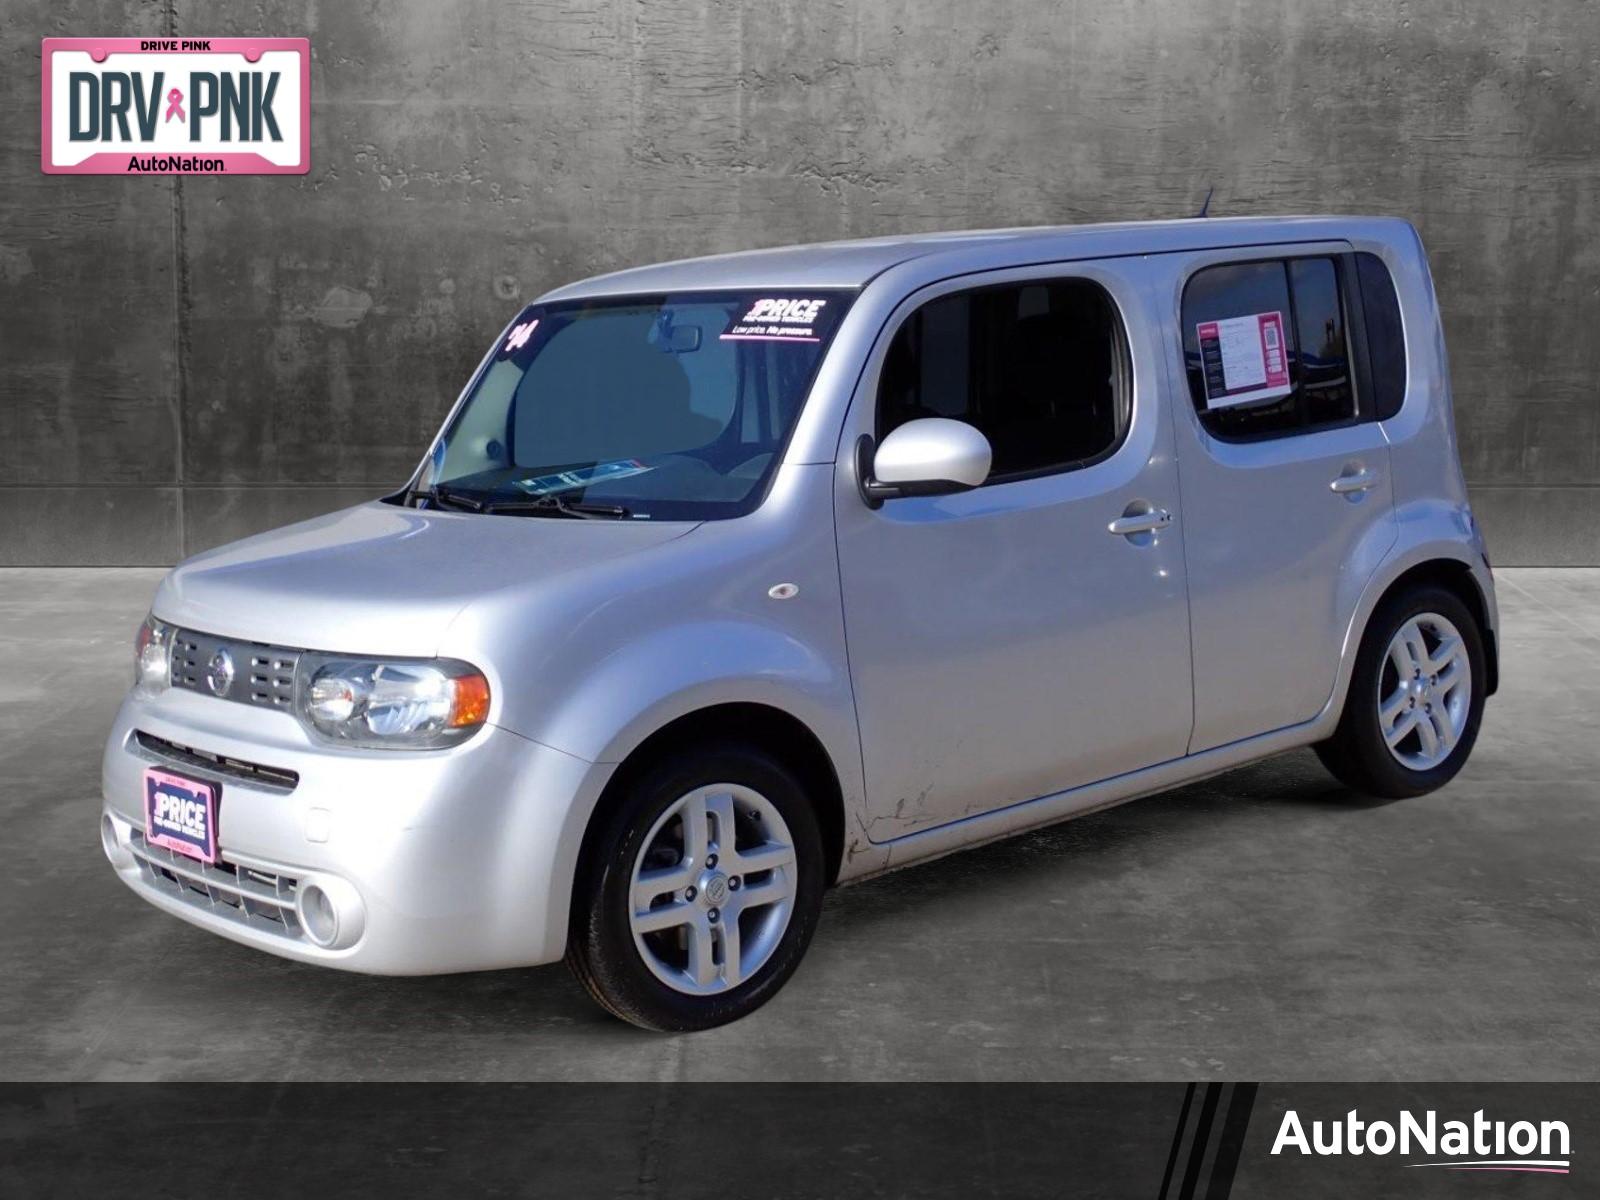 2014 Nissan cube Vehicle Photo in DENVER, CO 80221-3610